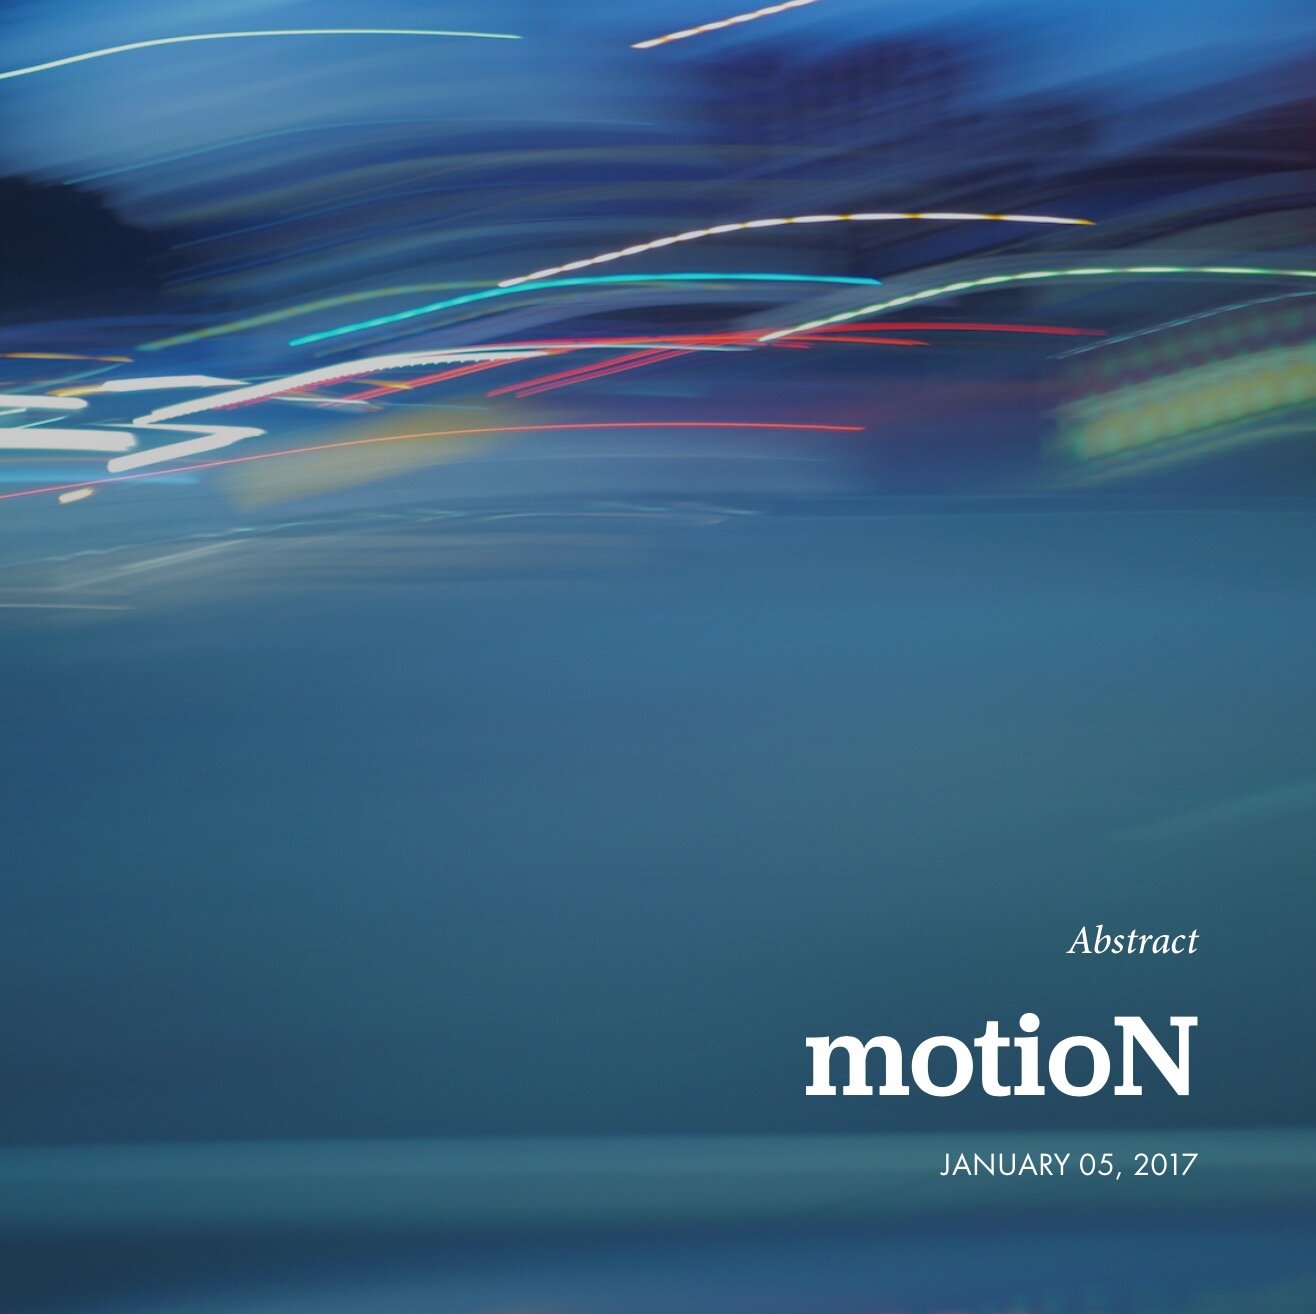 Abstract_motioN.jpg